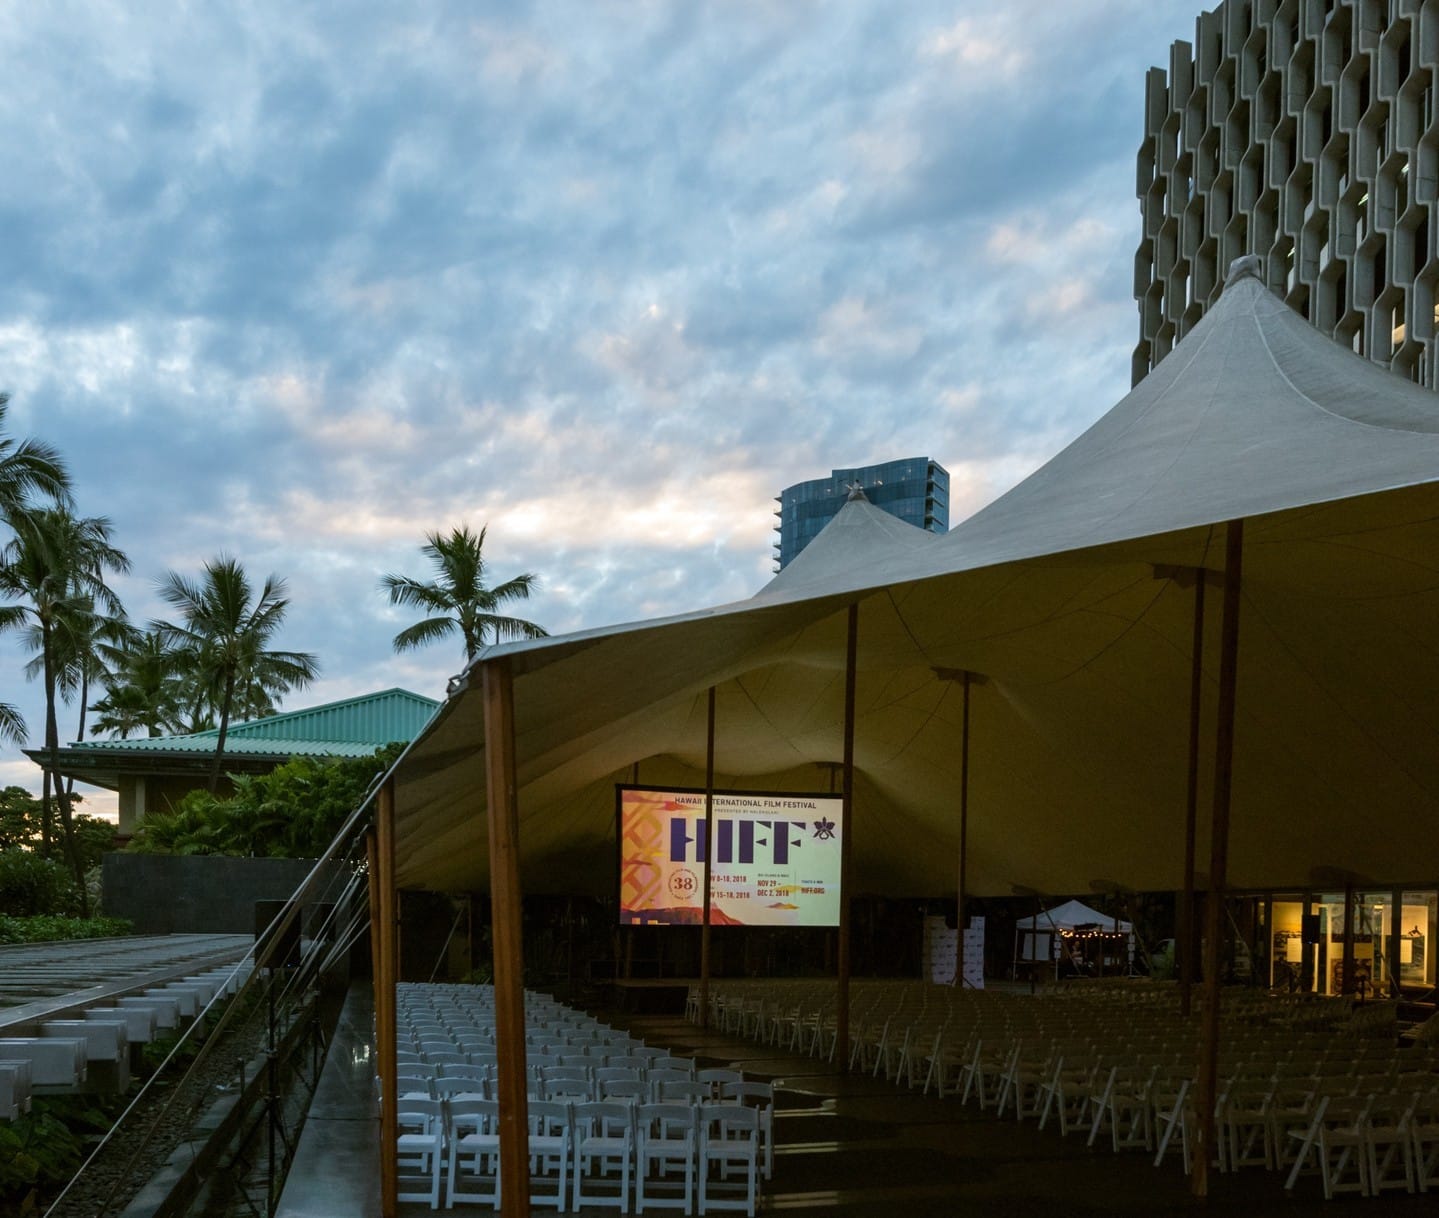 Come and support local student filmmakers at the @hiffhawaii University Shorts Showcase Program on October 17 at the IBM Building Courtyard. Visit the link in our bio to reserve complimentary tickets, while supplies last.